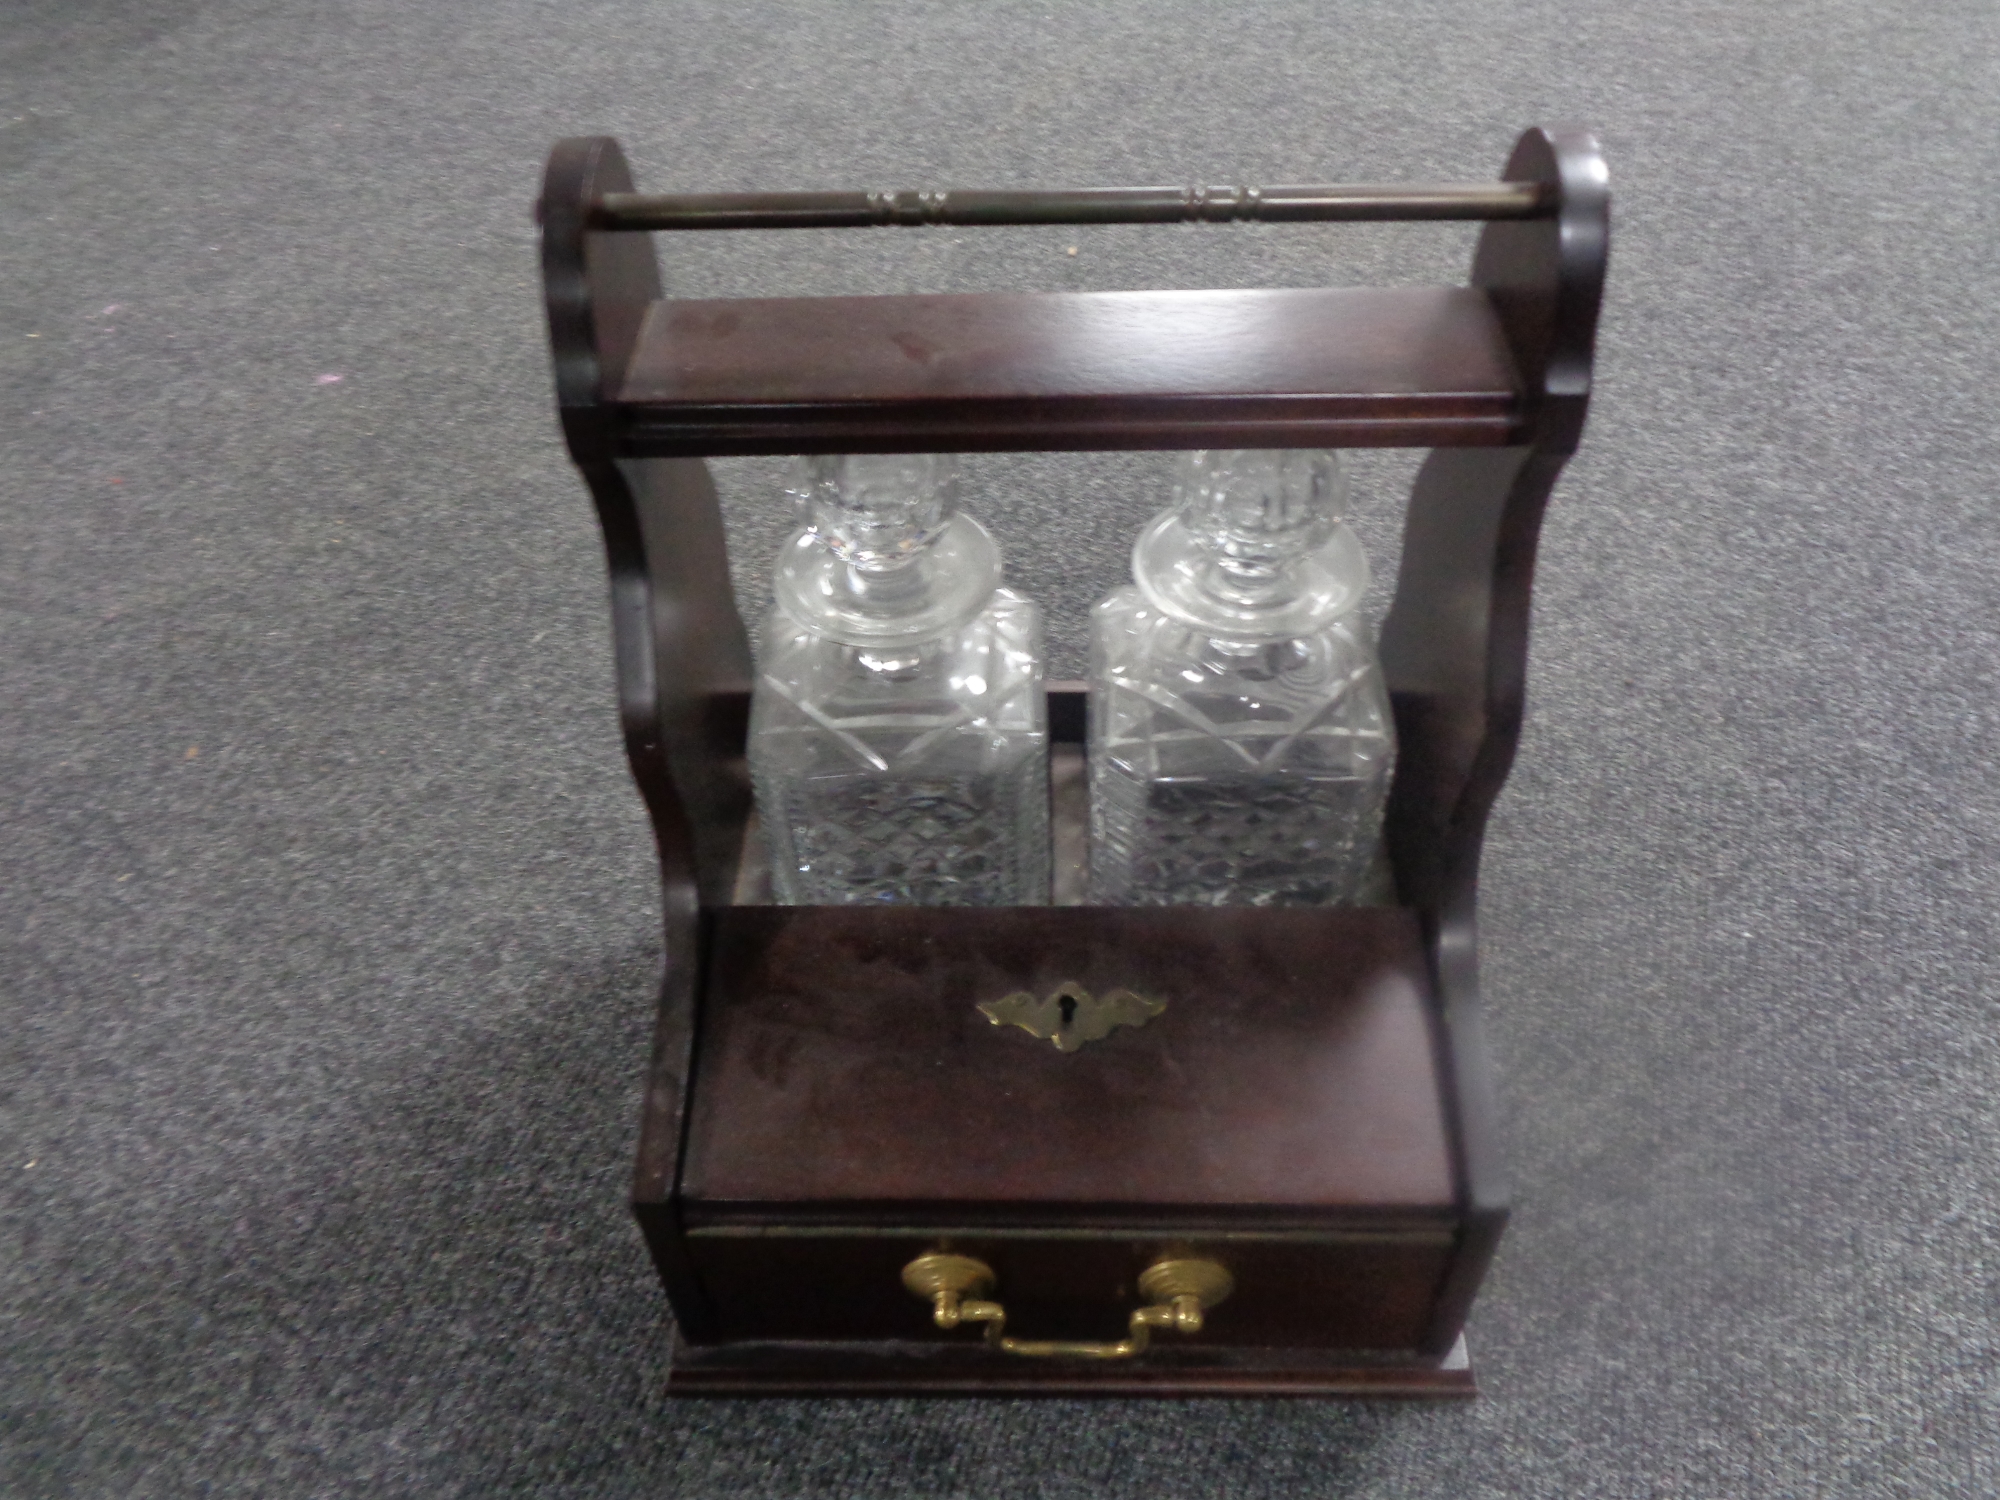 A 20th century Tantalus with two cut glass whiskey decanters and glasses, whiskey decanter label.